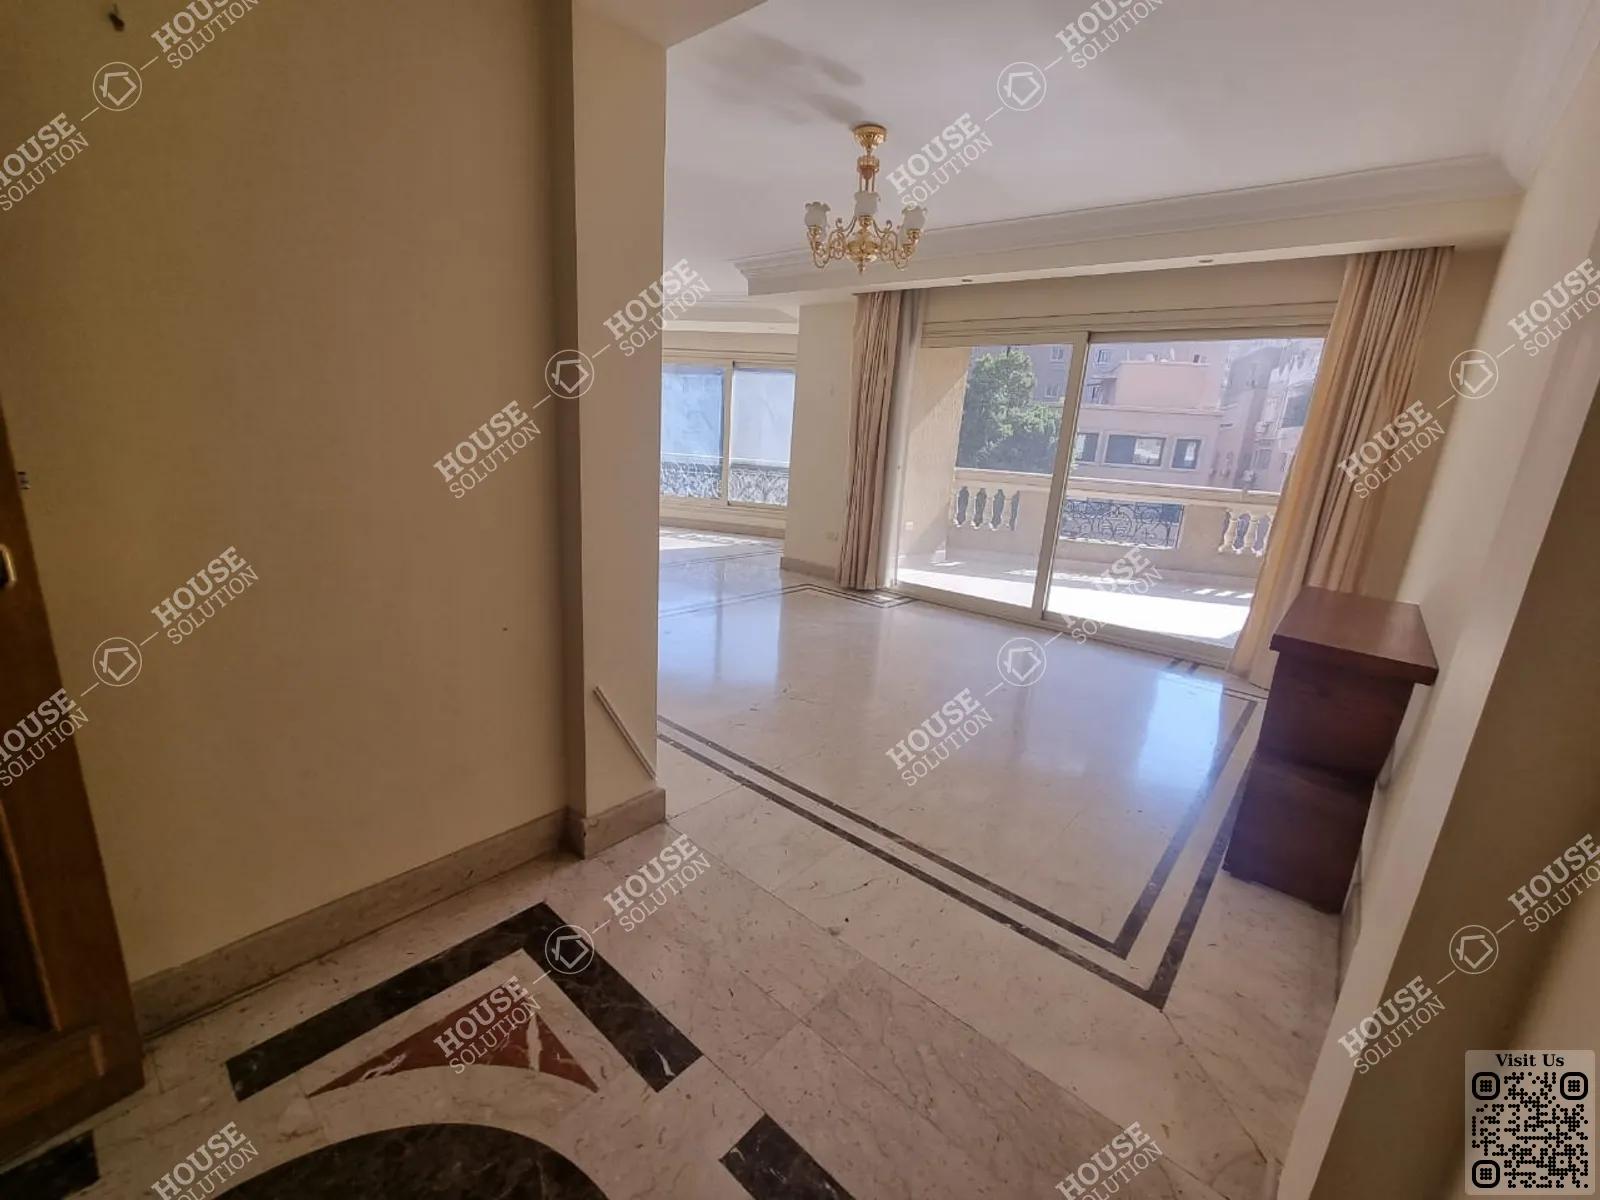 RECEPTION  @ Apartments For Rent In Maadi Maadi Degla Area: 235 m² consists of 4 Bedrooms 4 Bathrooms Modern furnished 5 stars #5625-0